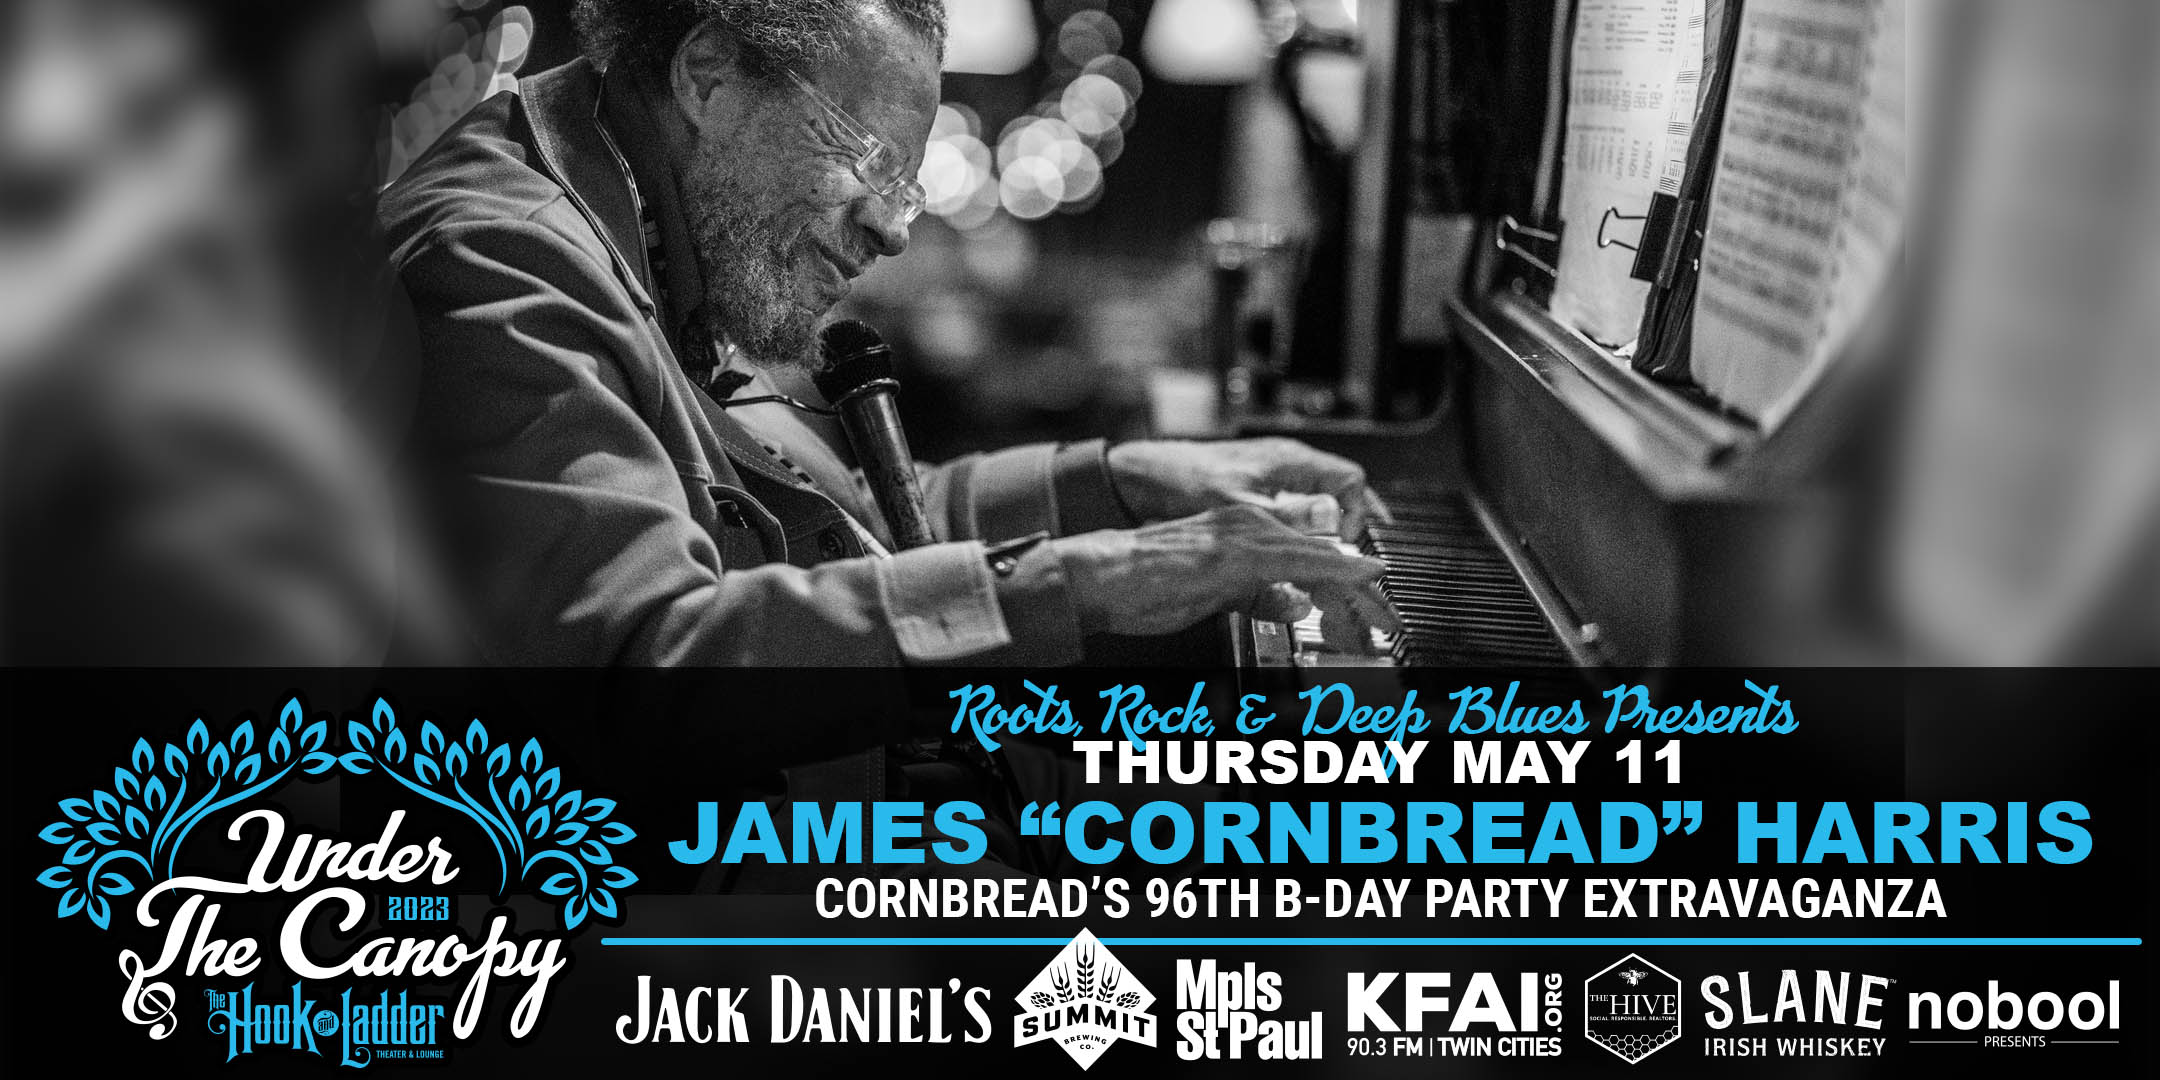 James Samuel "Cornbread" Harris Sr. Cornbread's 96th B-Day Party Extravaganza Thursday, May 11 Under The Canopy at The Hook and Ladder Theater